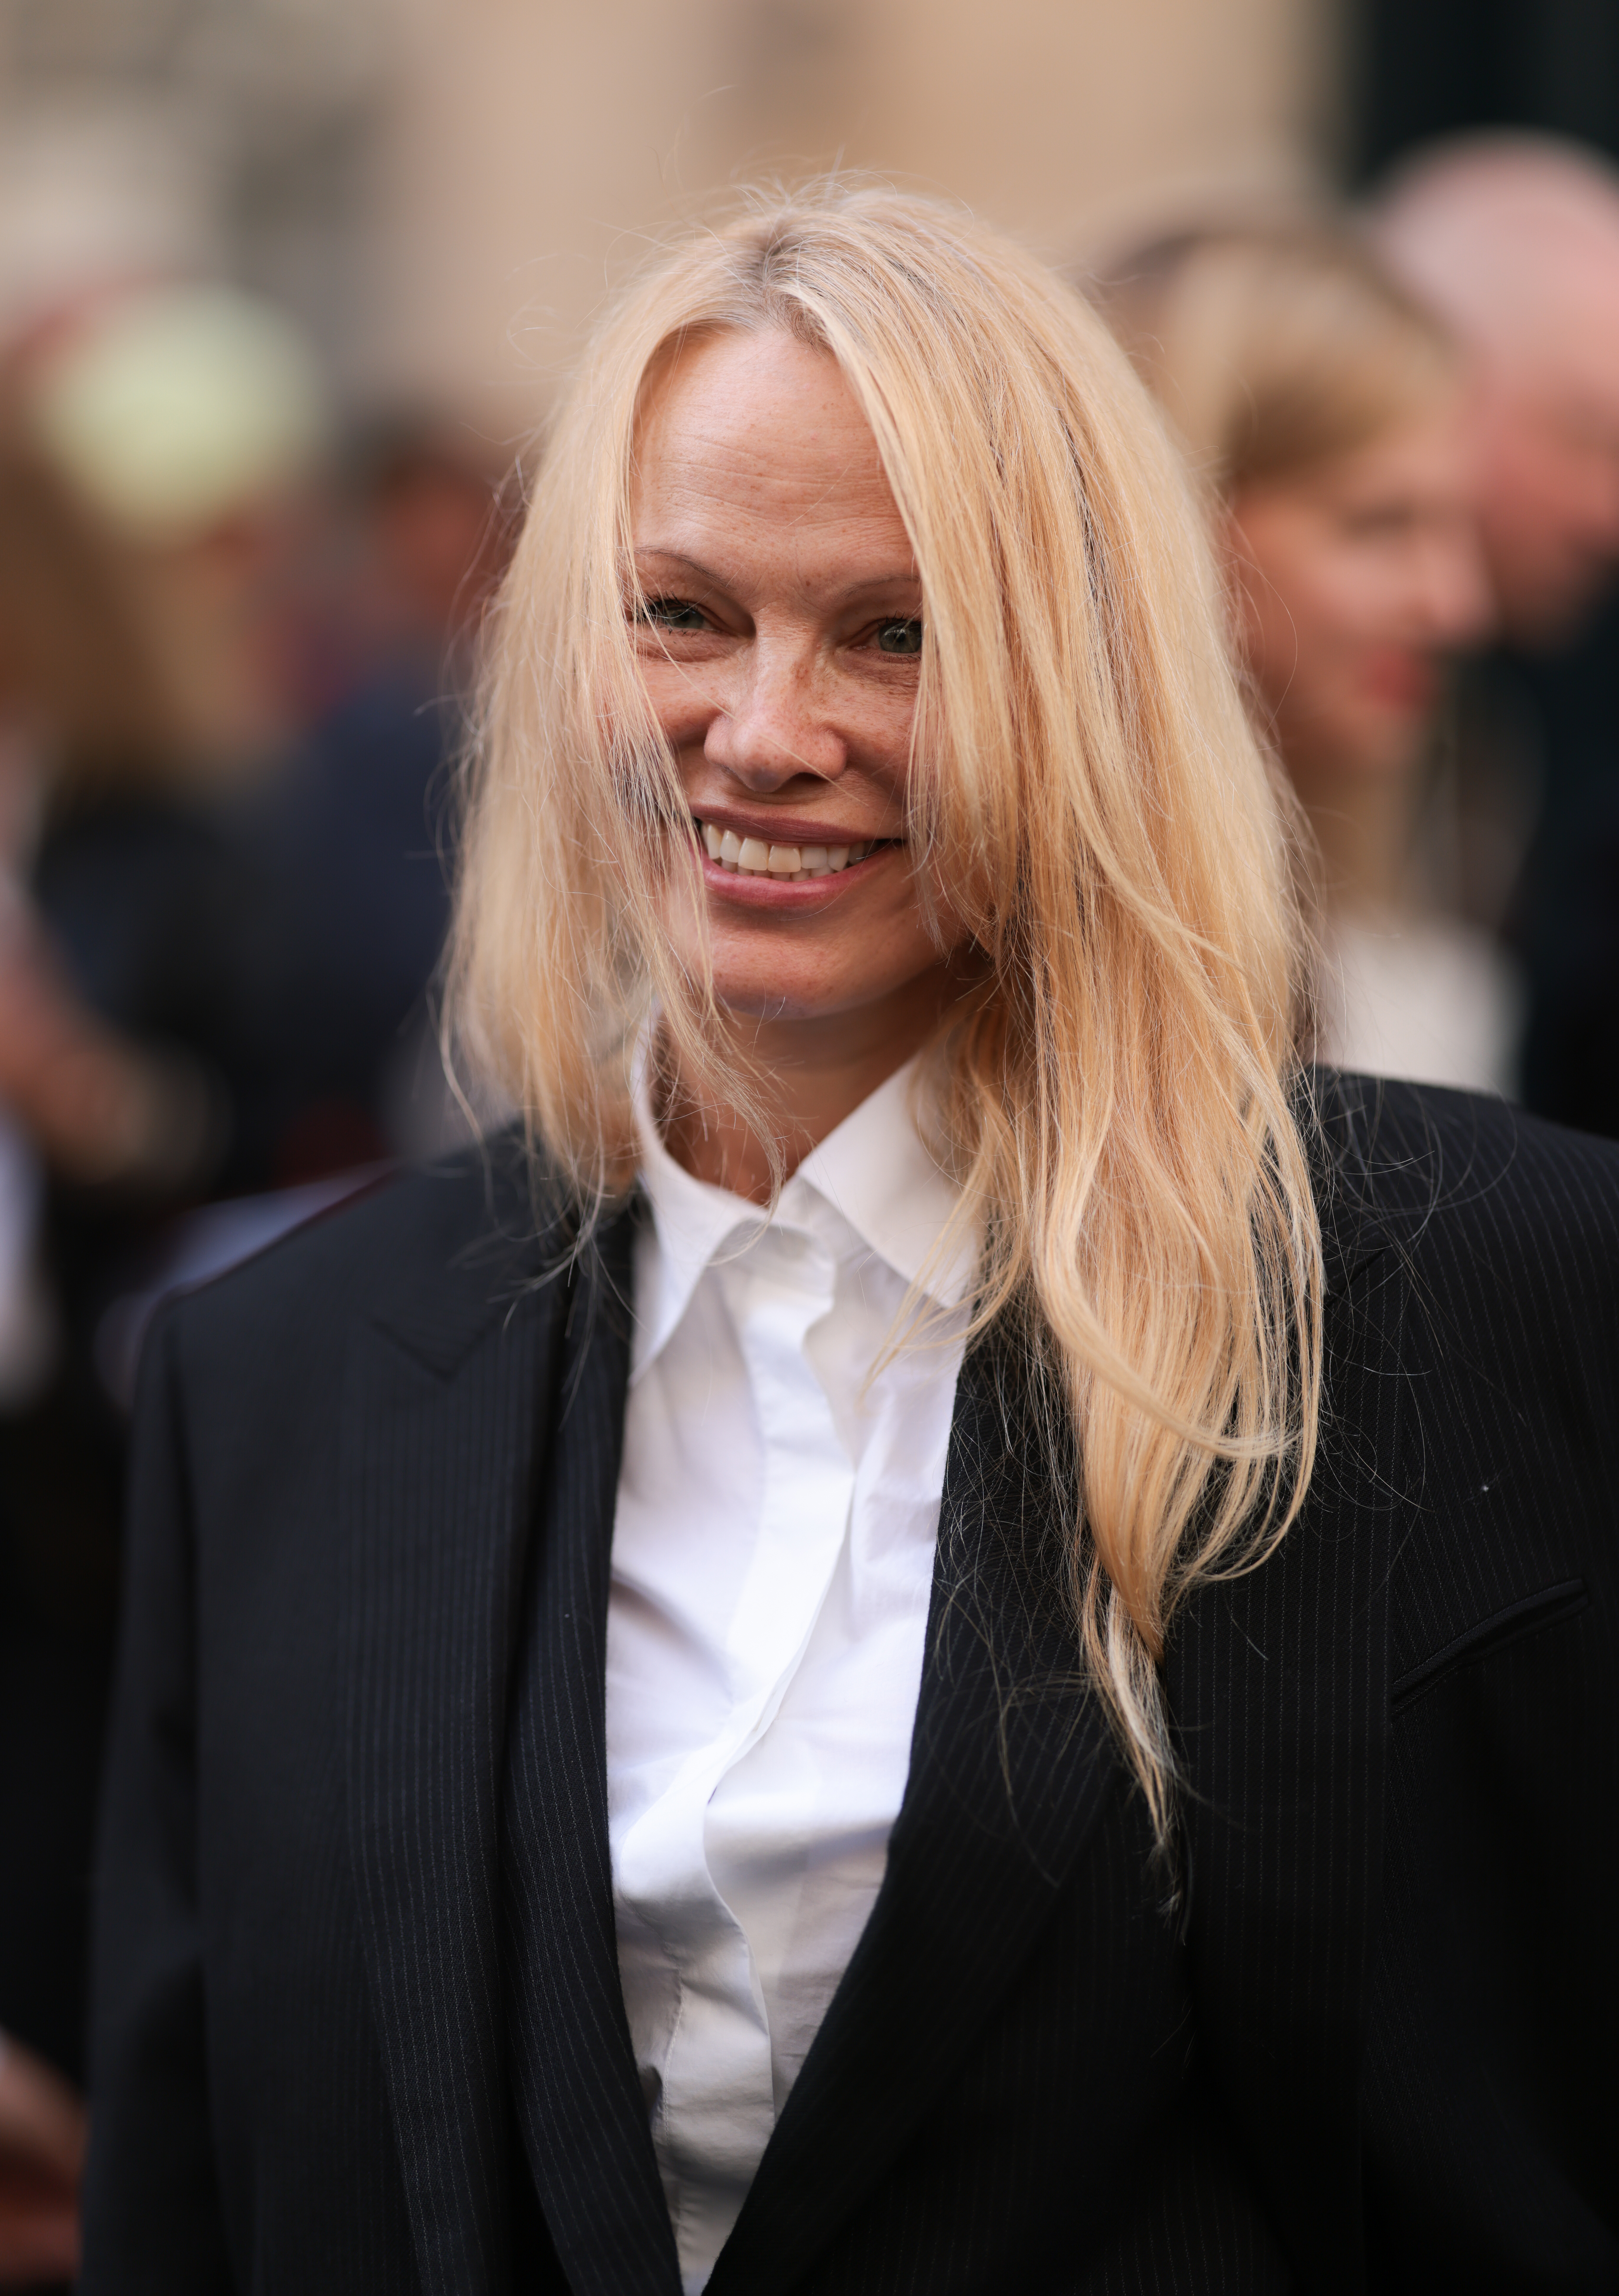 Pamela in a suit smiling on the red carpet with her hair down